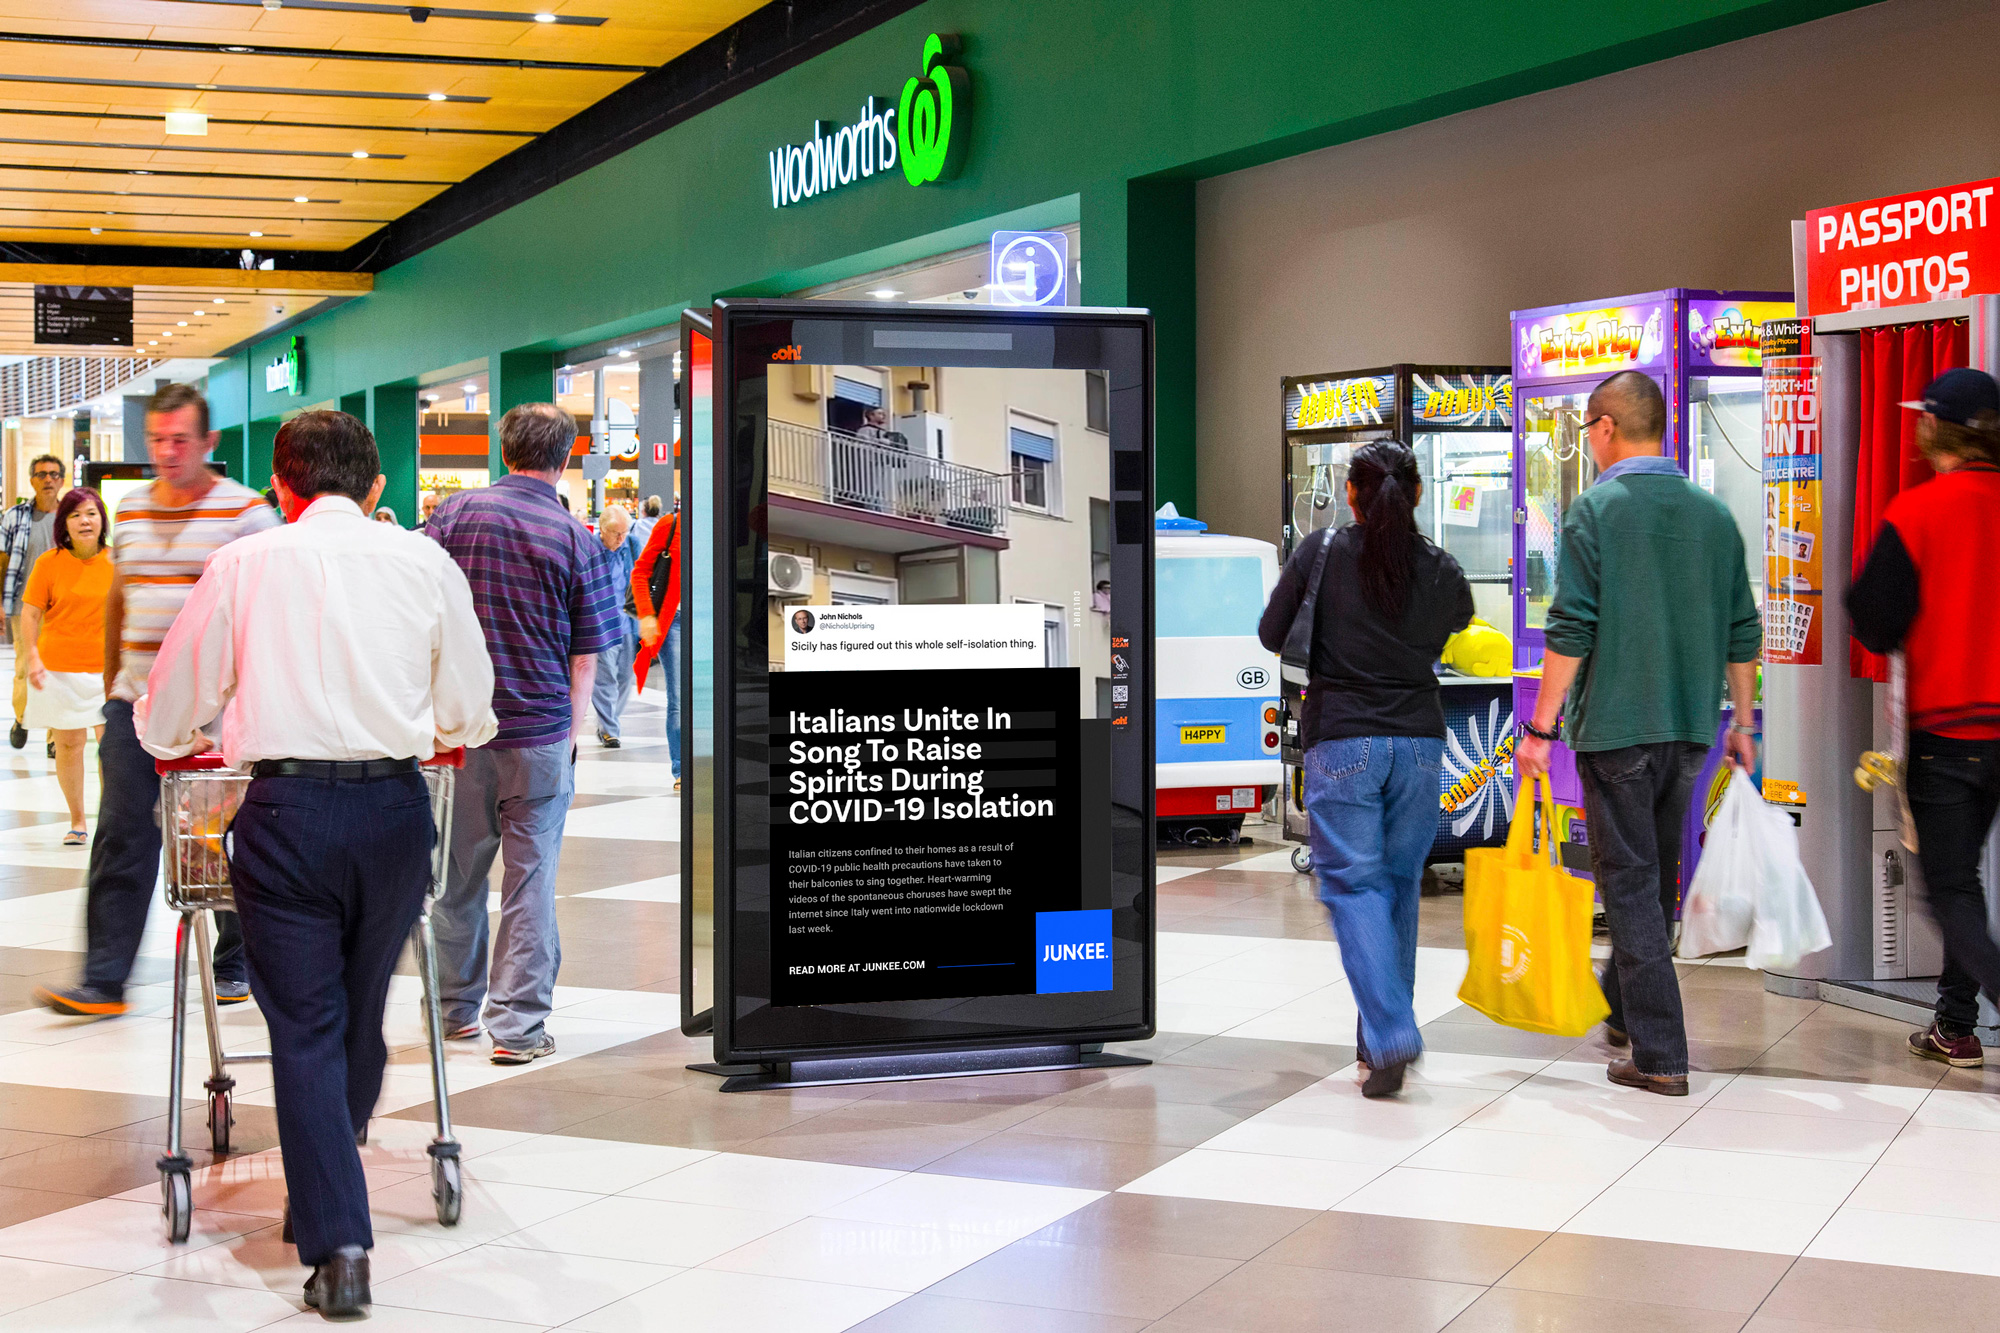 Junkee article on retail screen advertising in shopping centre